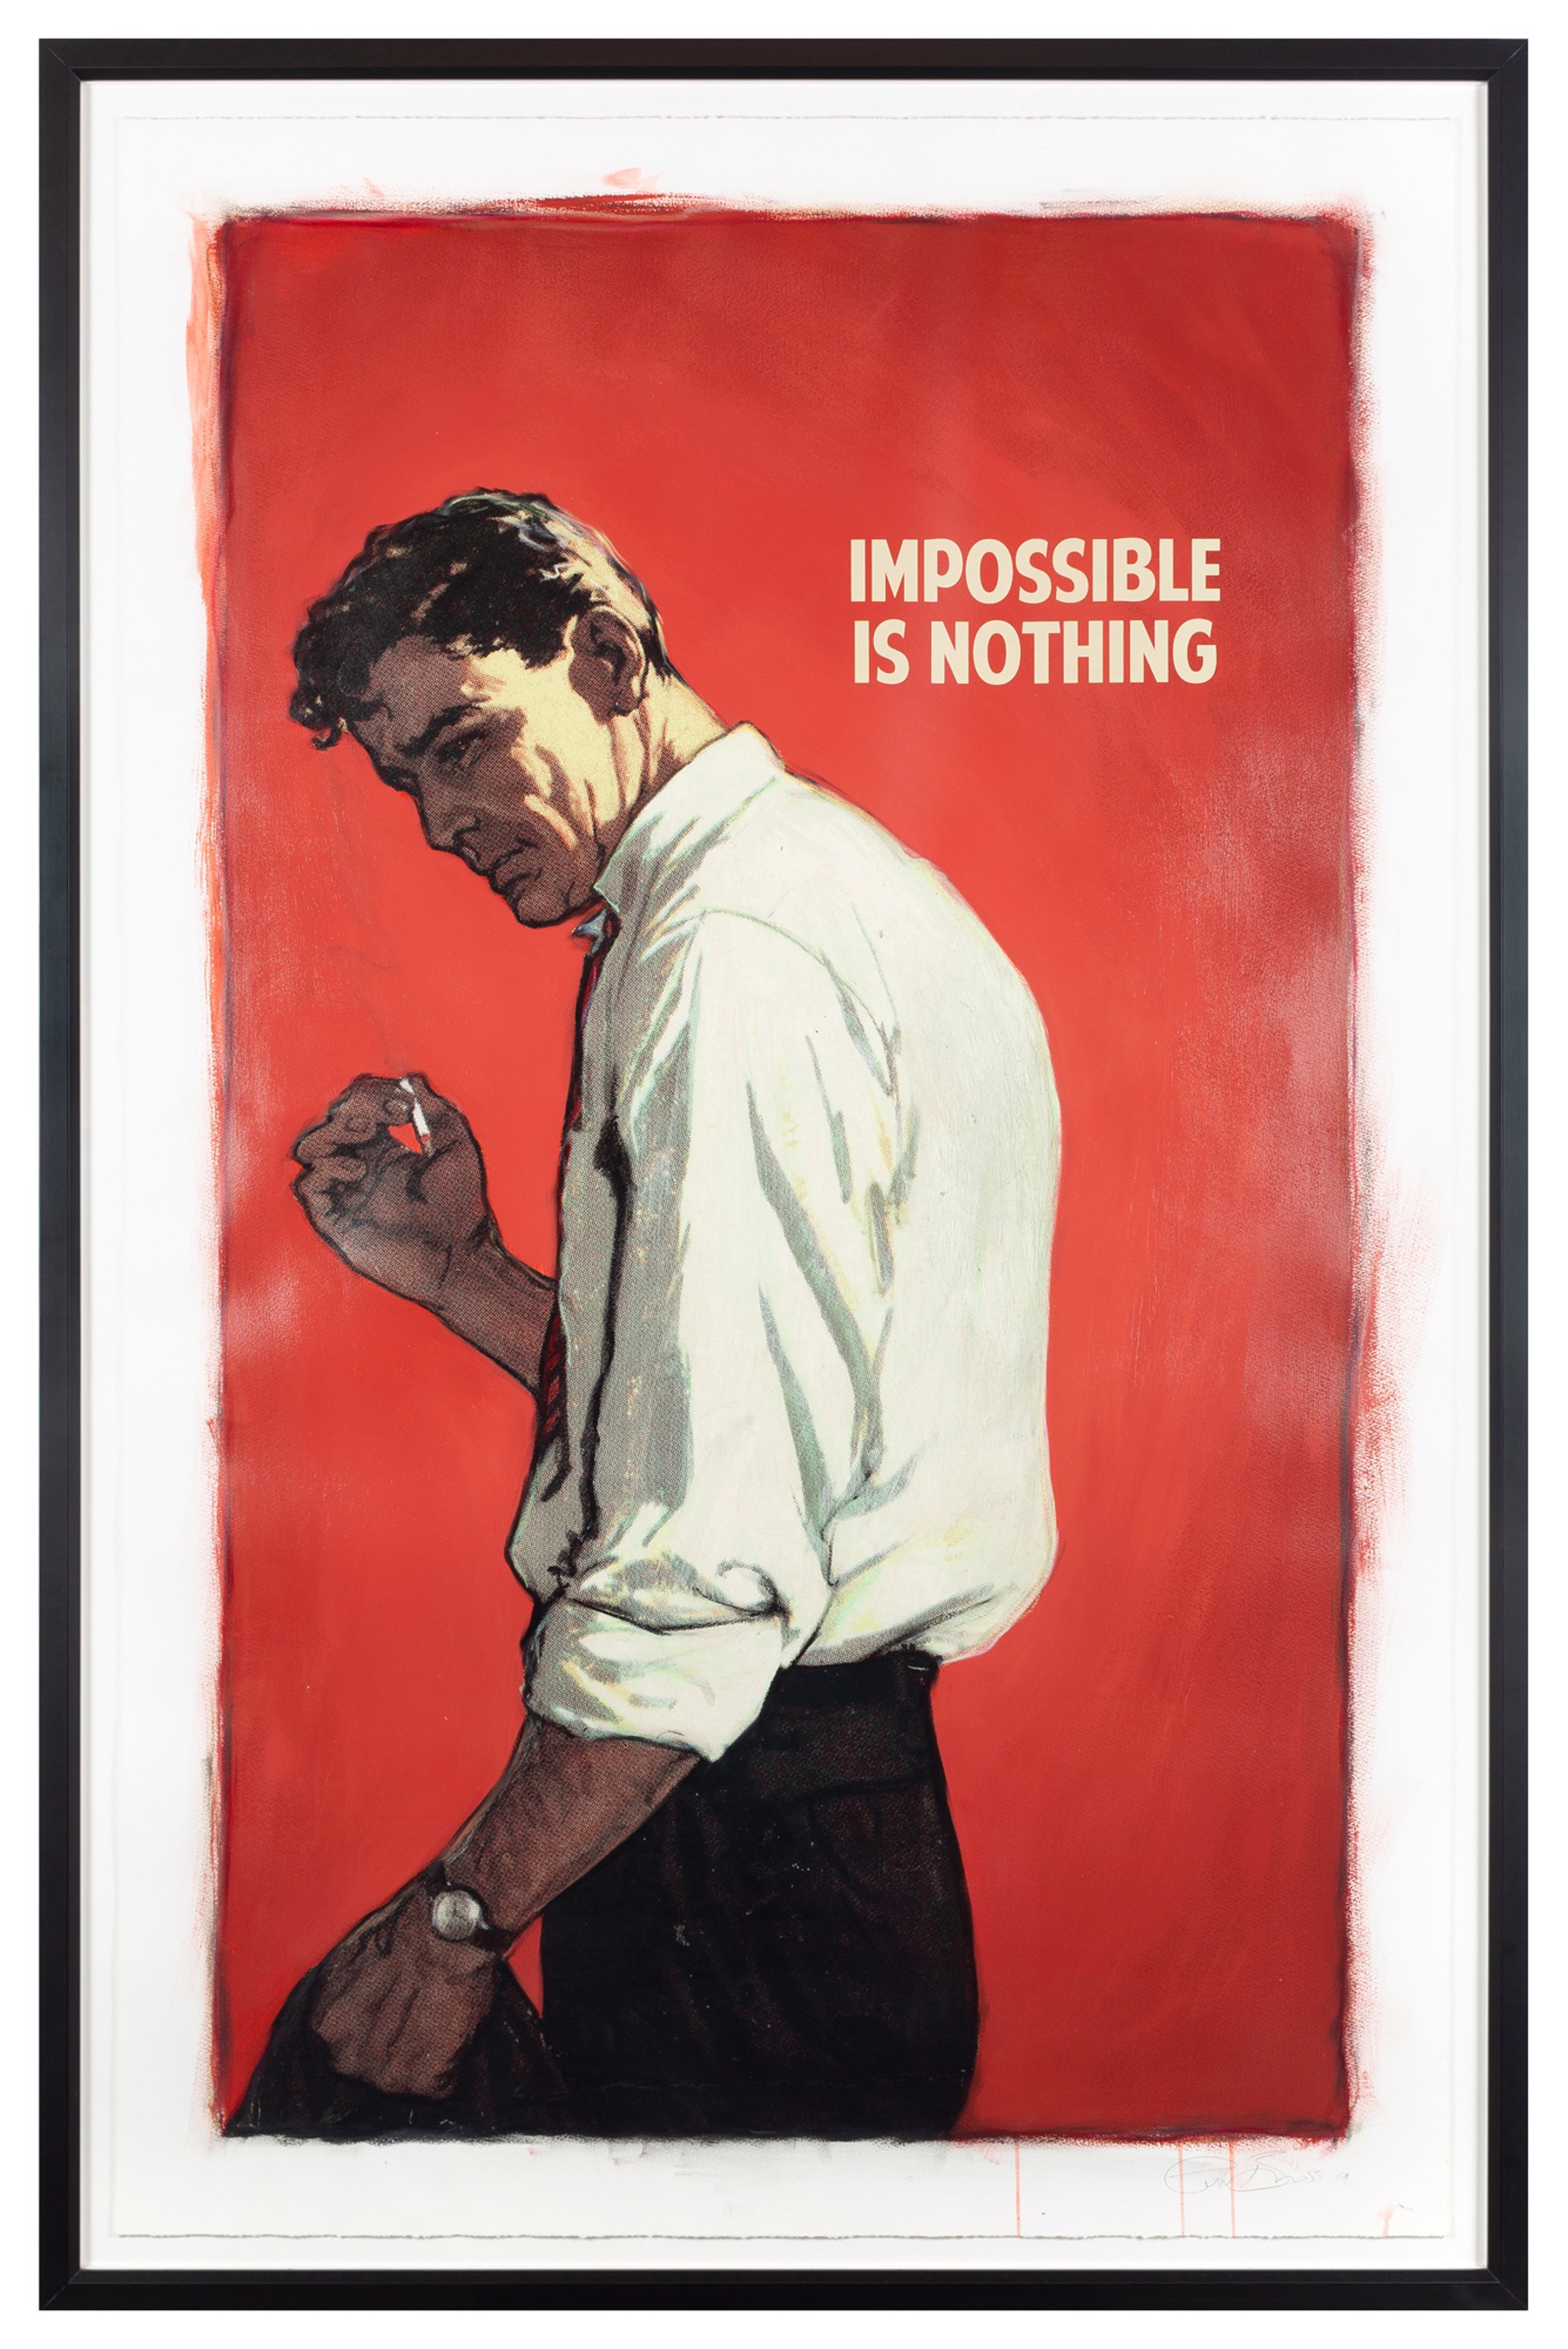 Impossible Is Nothing by The Connor Brothers